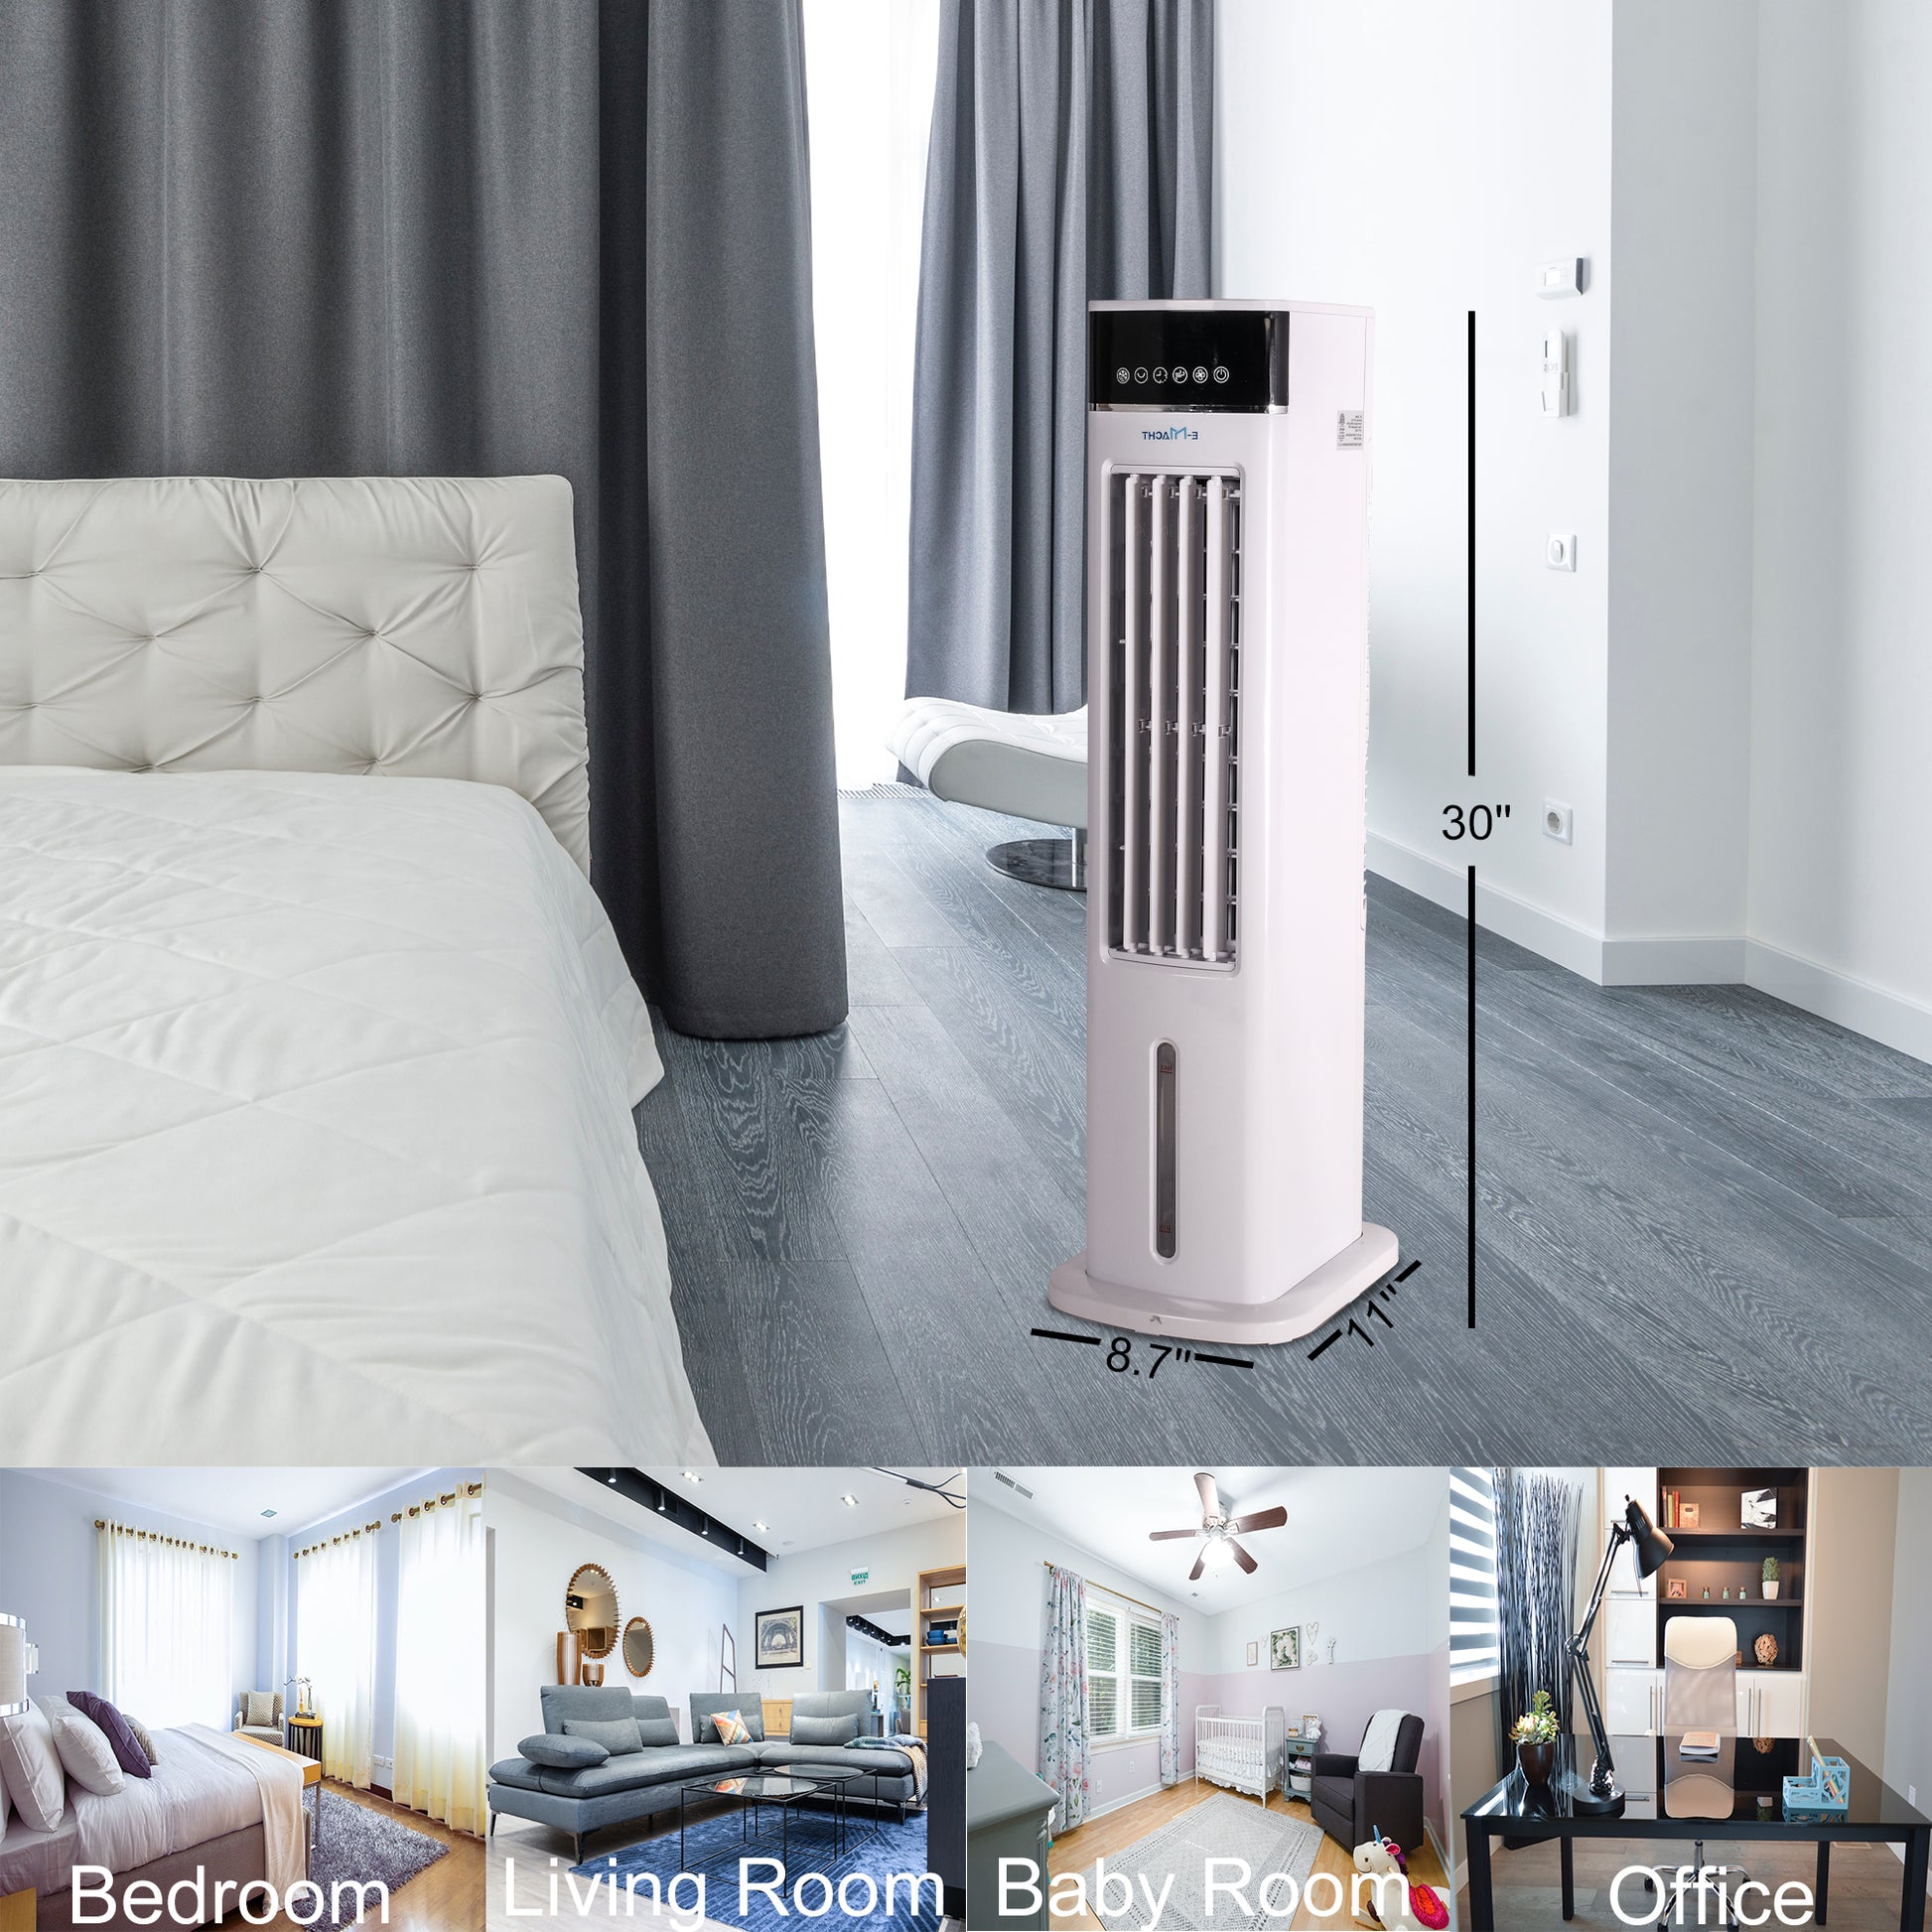 Luckyermore 3-in-1 Portable Air Cooler, Cooling Tower Fan with 3 Speeds & 3 Modes, 3L Water Tank, 12H Timer Air Cooling Fan Remote Control for Bedroom, Office